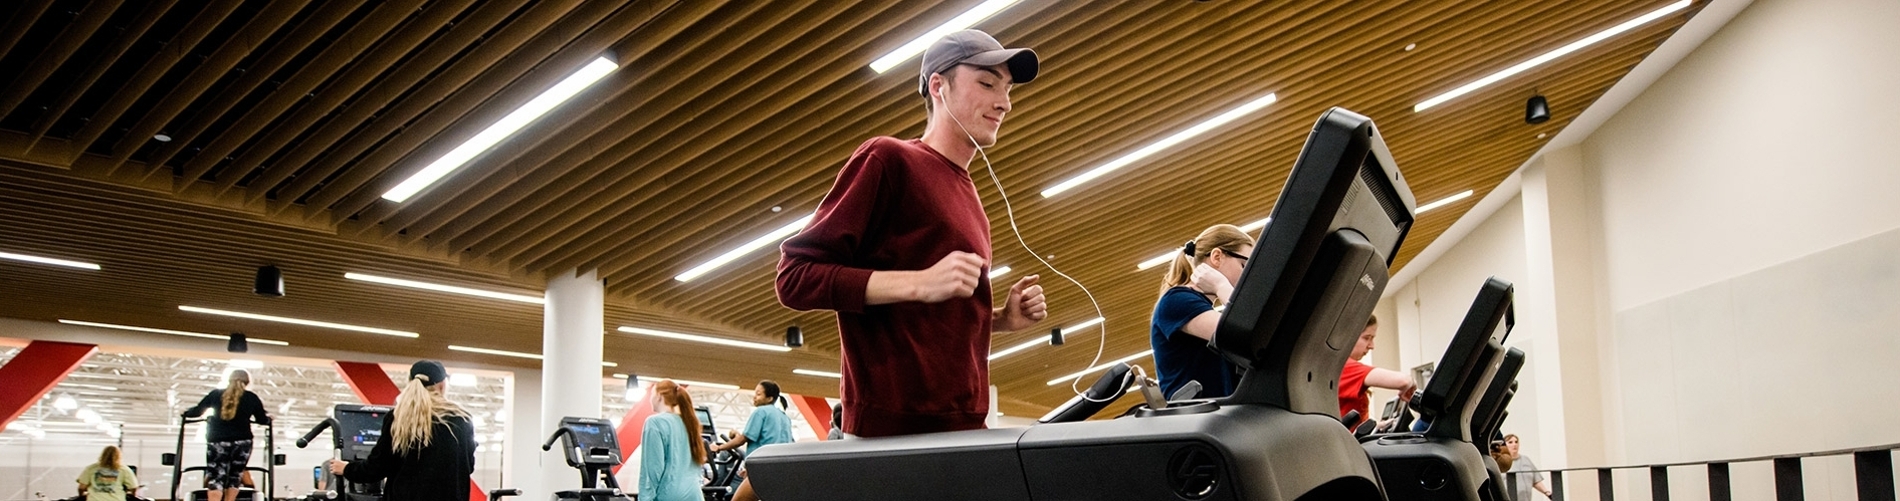 a student runs on a treadmill in the Rec Center